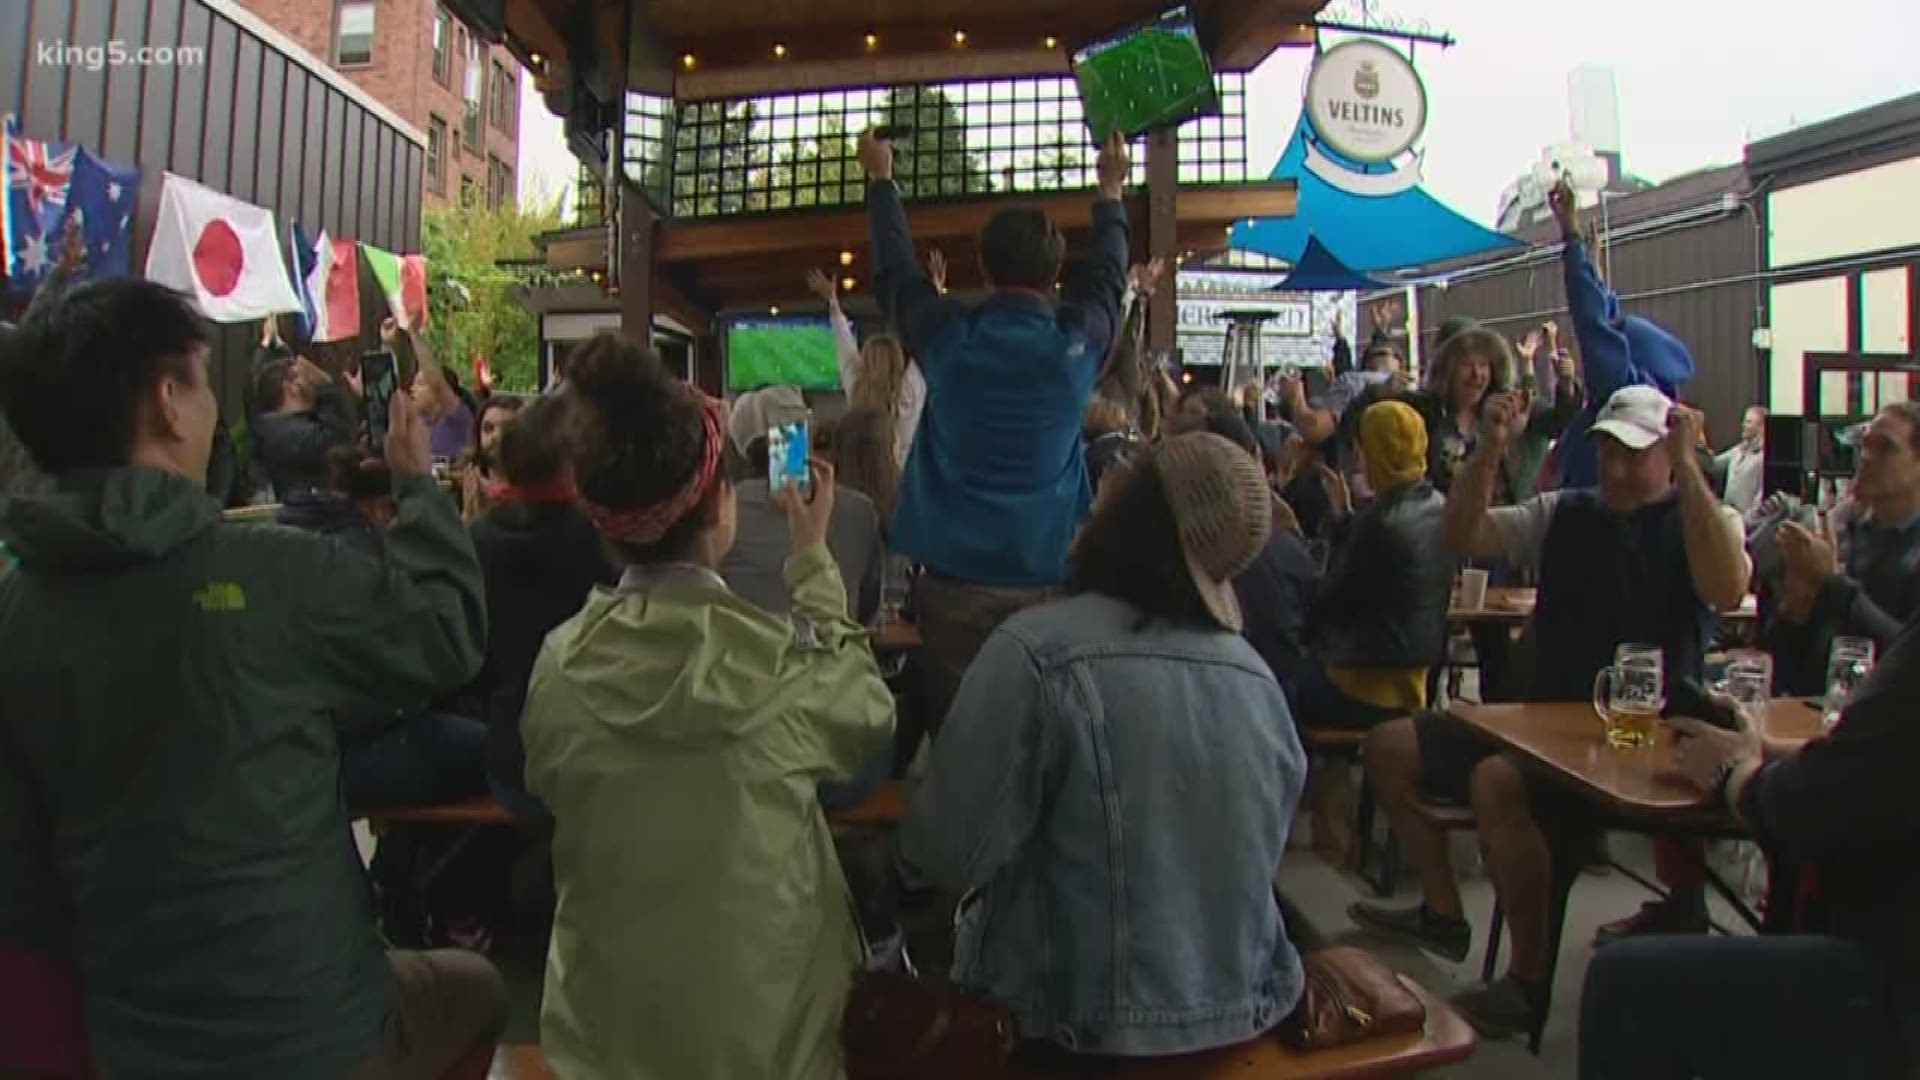 Seattle's Megan Rapinoe and her UW Women's Soccer teammates have made headlines for more than one reason. KING 5's Chris Daniels reports from Tuesday's watch party.